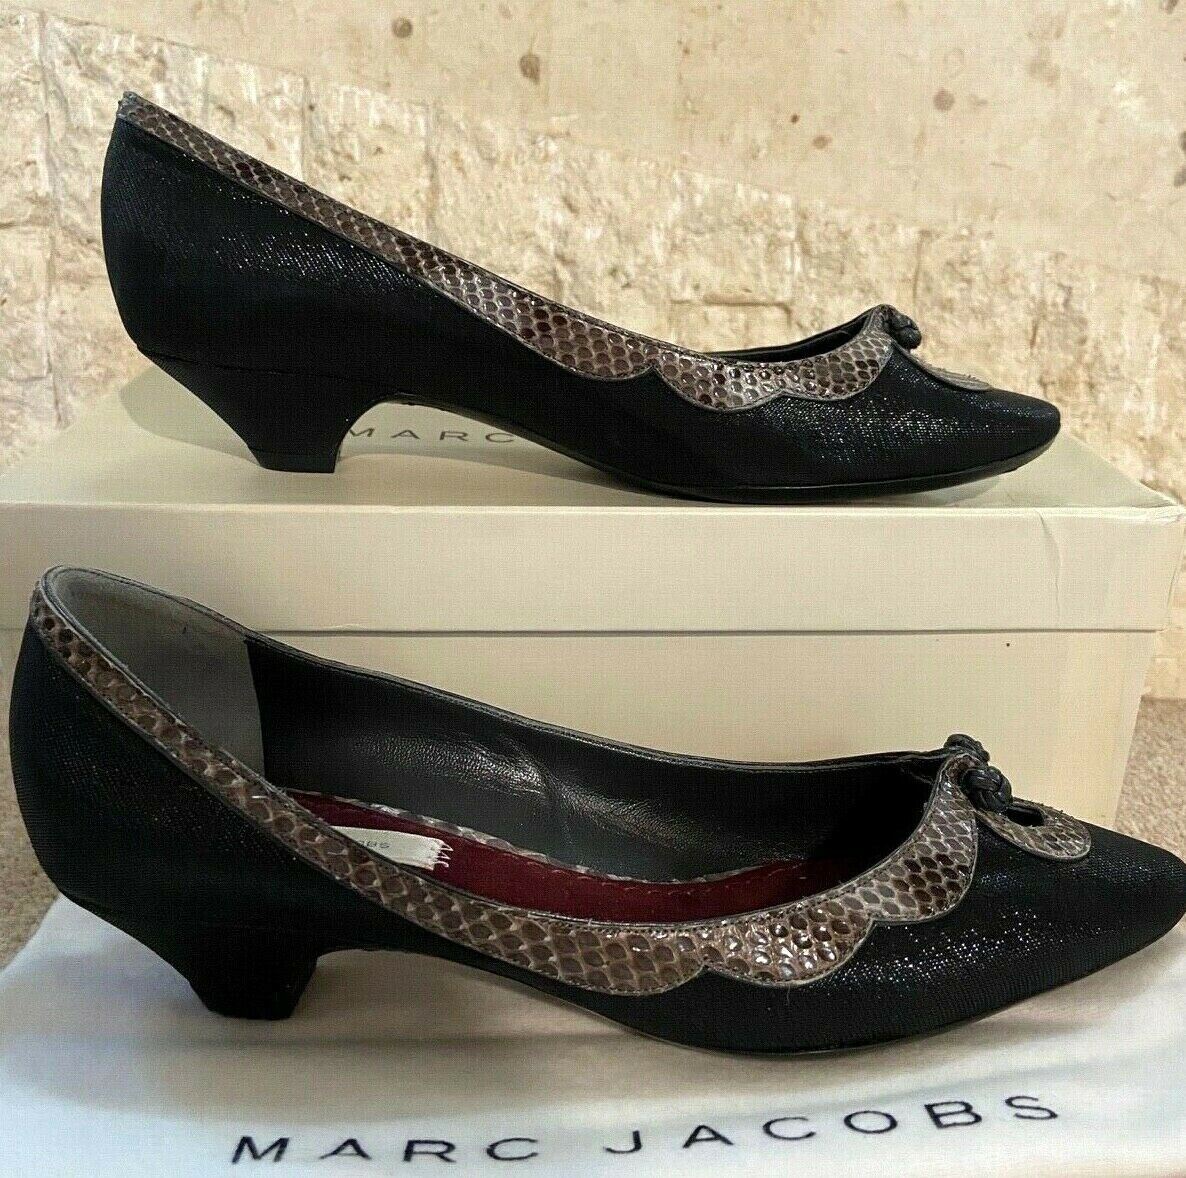 Marc Jacobs Black Low Heeled Toe Cut Out Slipper Court Shoes UK 3.5 US 6 EU 36 Timeless Fashions